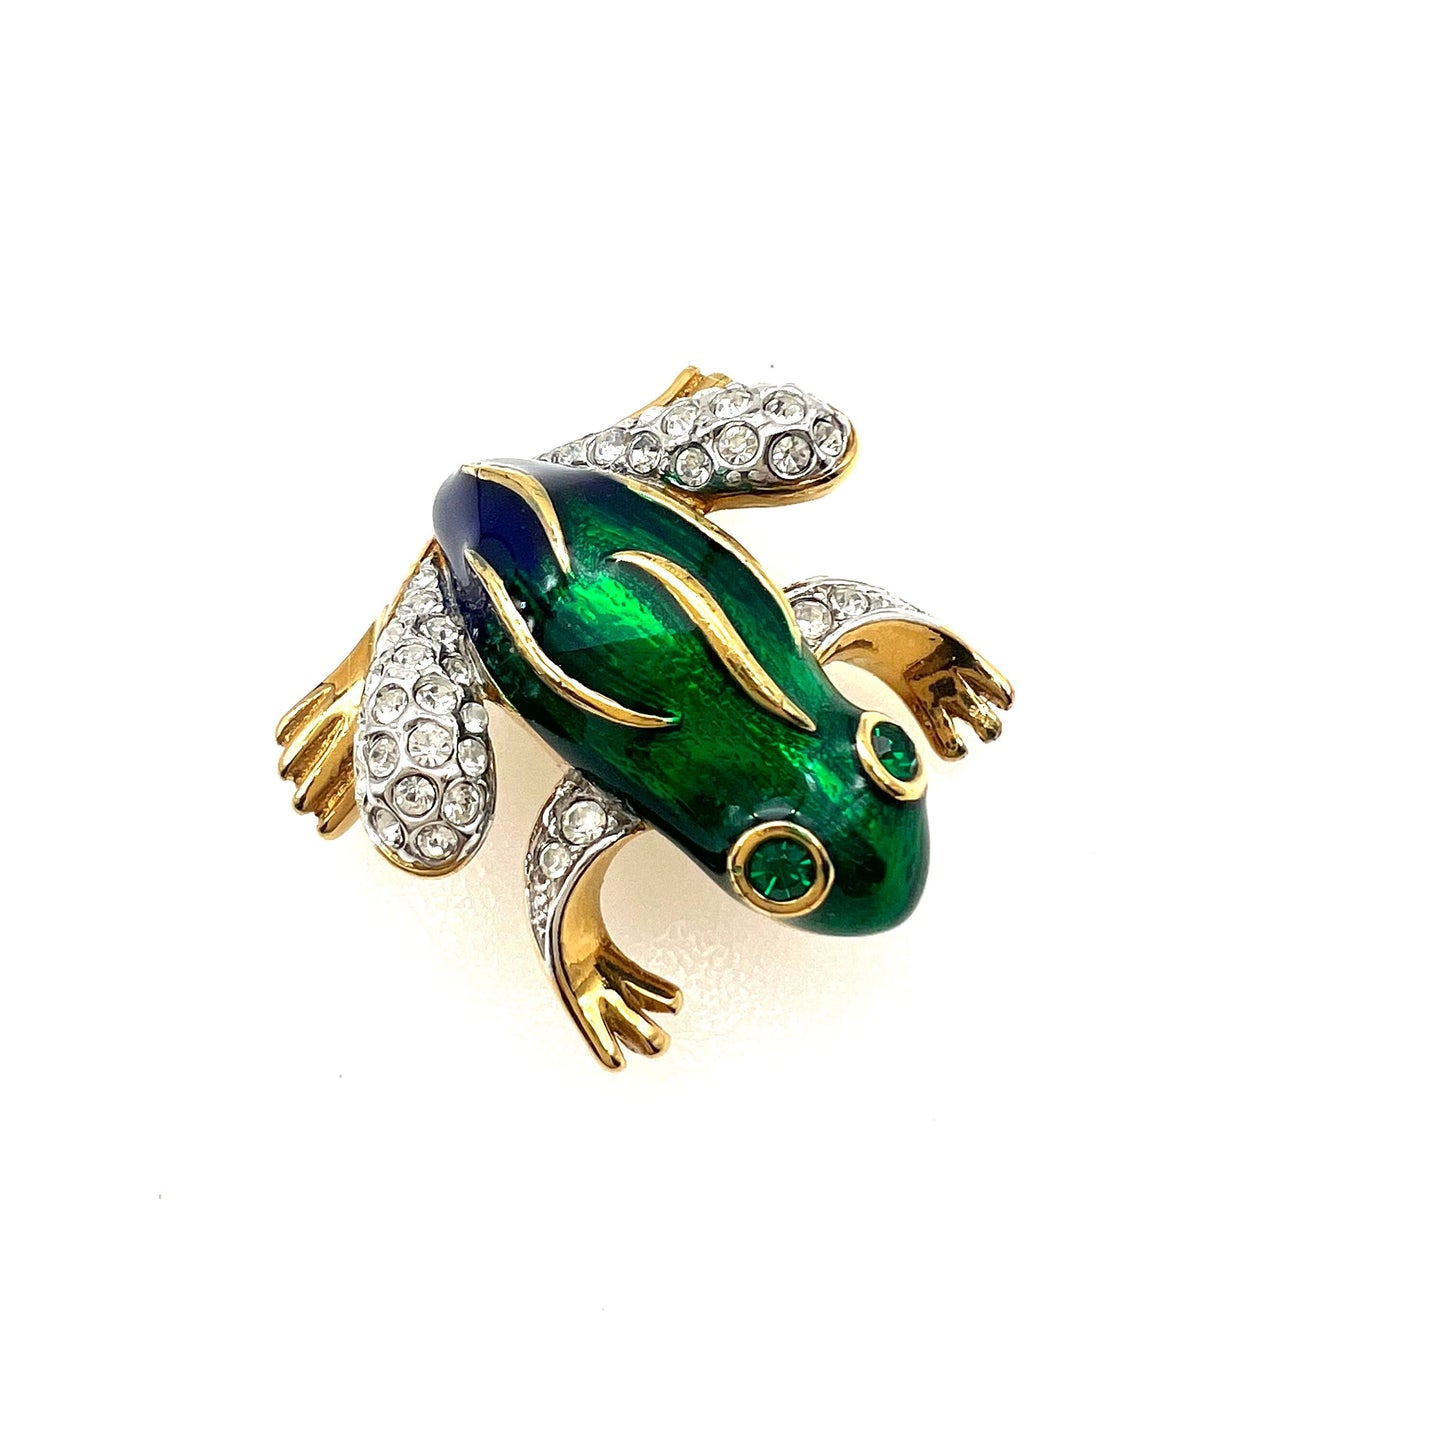 Attwood and Sawyer 22ct Gold Plated Swarovski Crystal and Enamel Frog Brooch